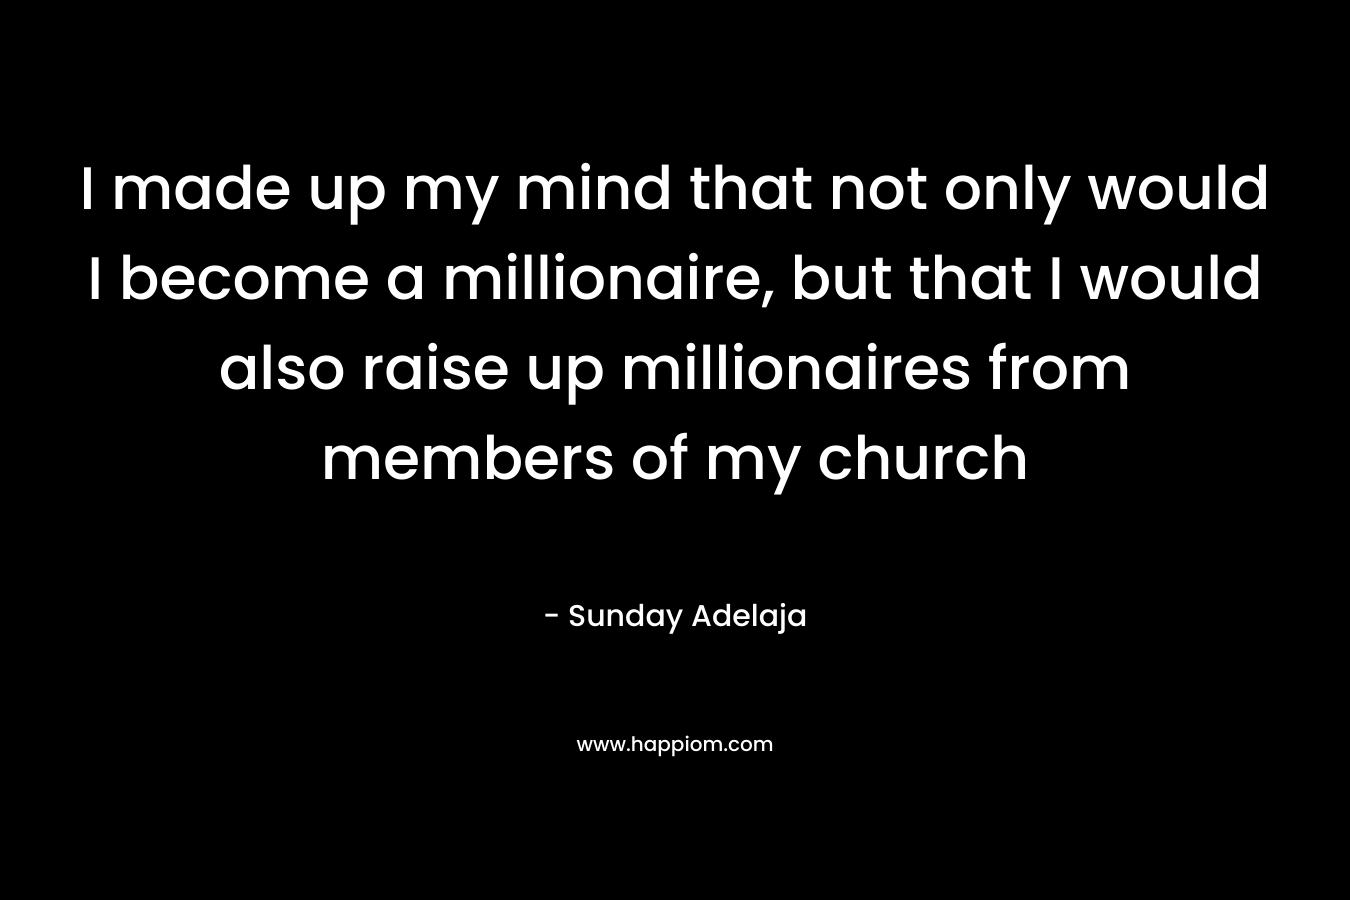 I made up my mind that not only would I become a millionaire, but that I would also raise up millionaires from members of my church